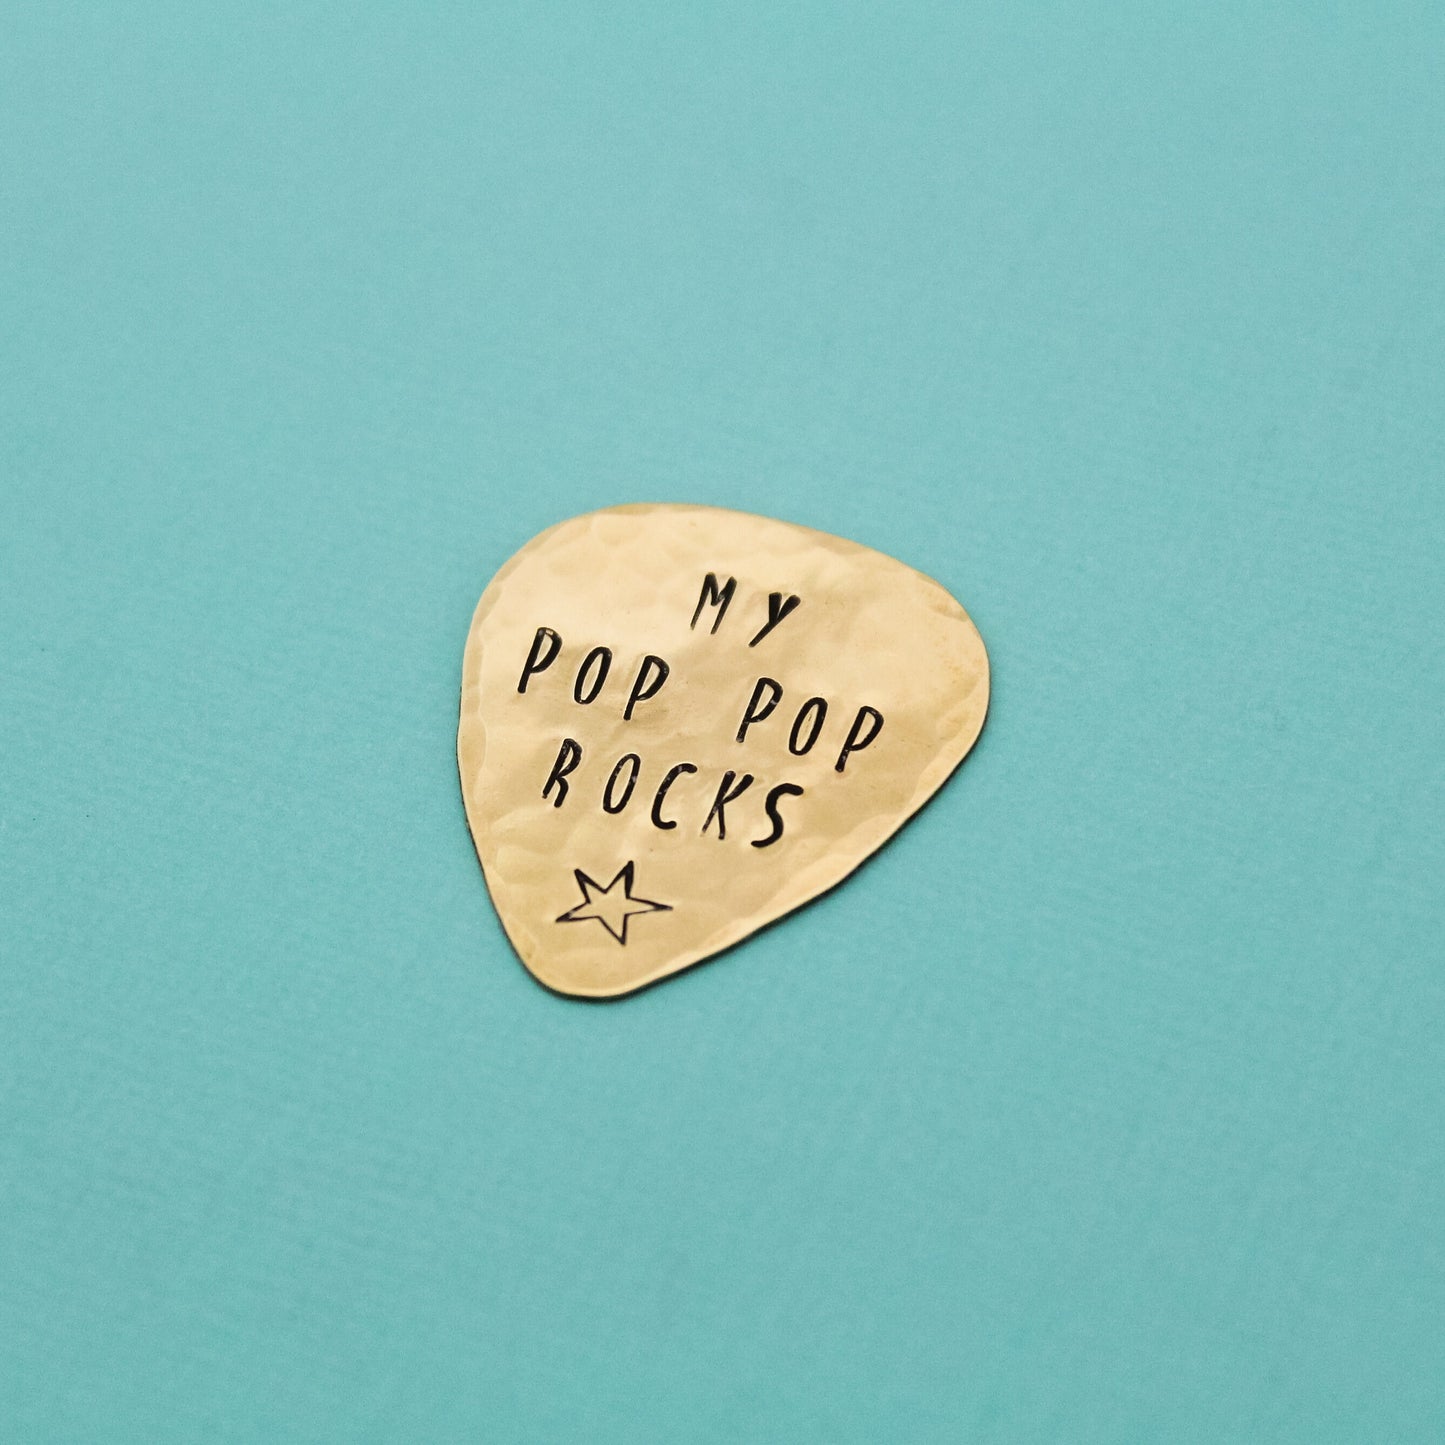 Guitar Pick Keychain with Case, Father's Day Gifts, Gifts for Him, Gifts for Guitar Players, You Rock, I Pick You, Personalized Hand Stamped